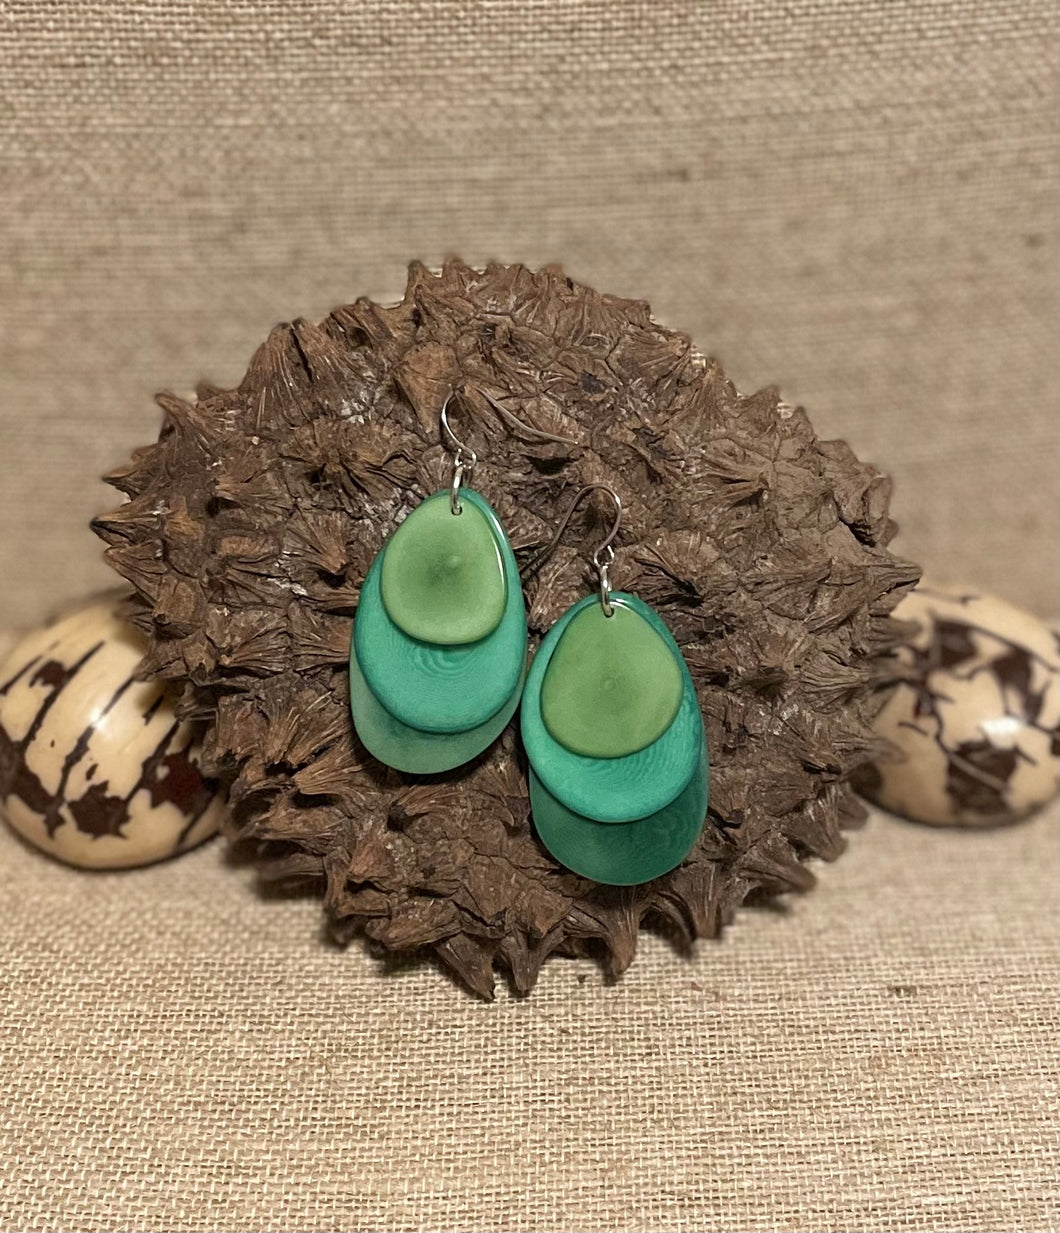 Shades of Green Tagua Nut Earrings